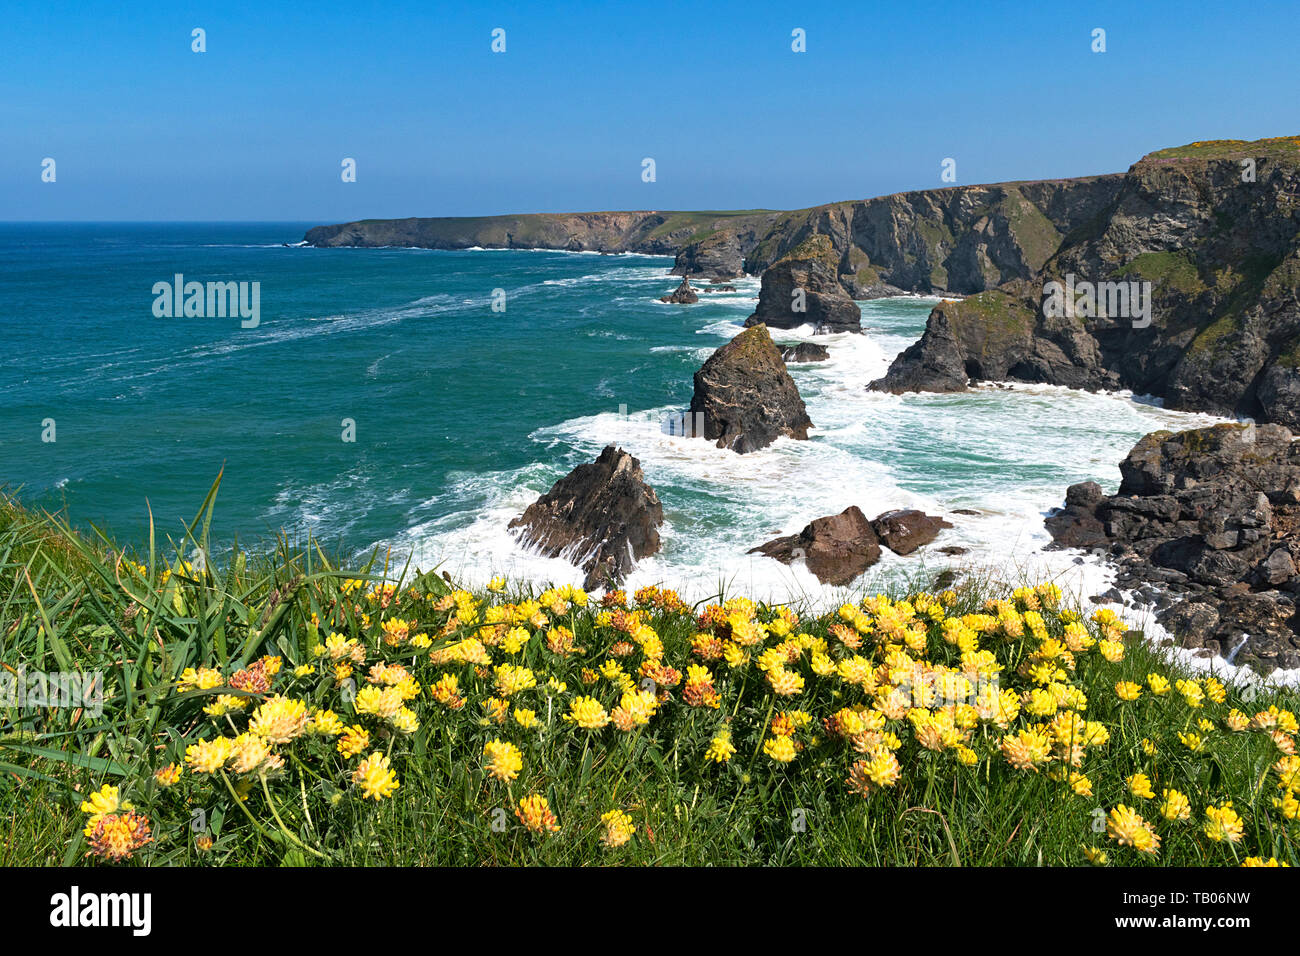 Bedruthan steps, côte nord, Cornwall, Angleterre, Grande-Bretagne, Royaume-Uni Banque D'Images